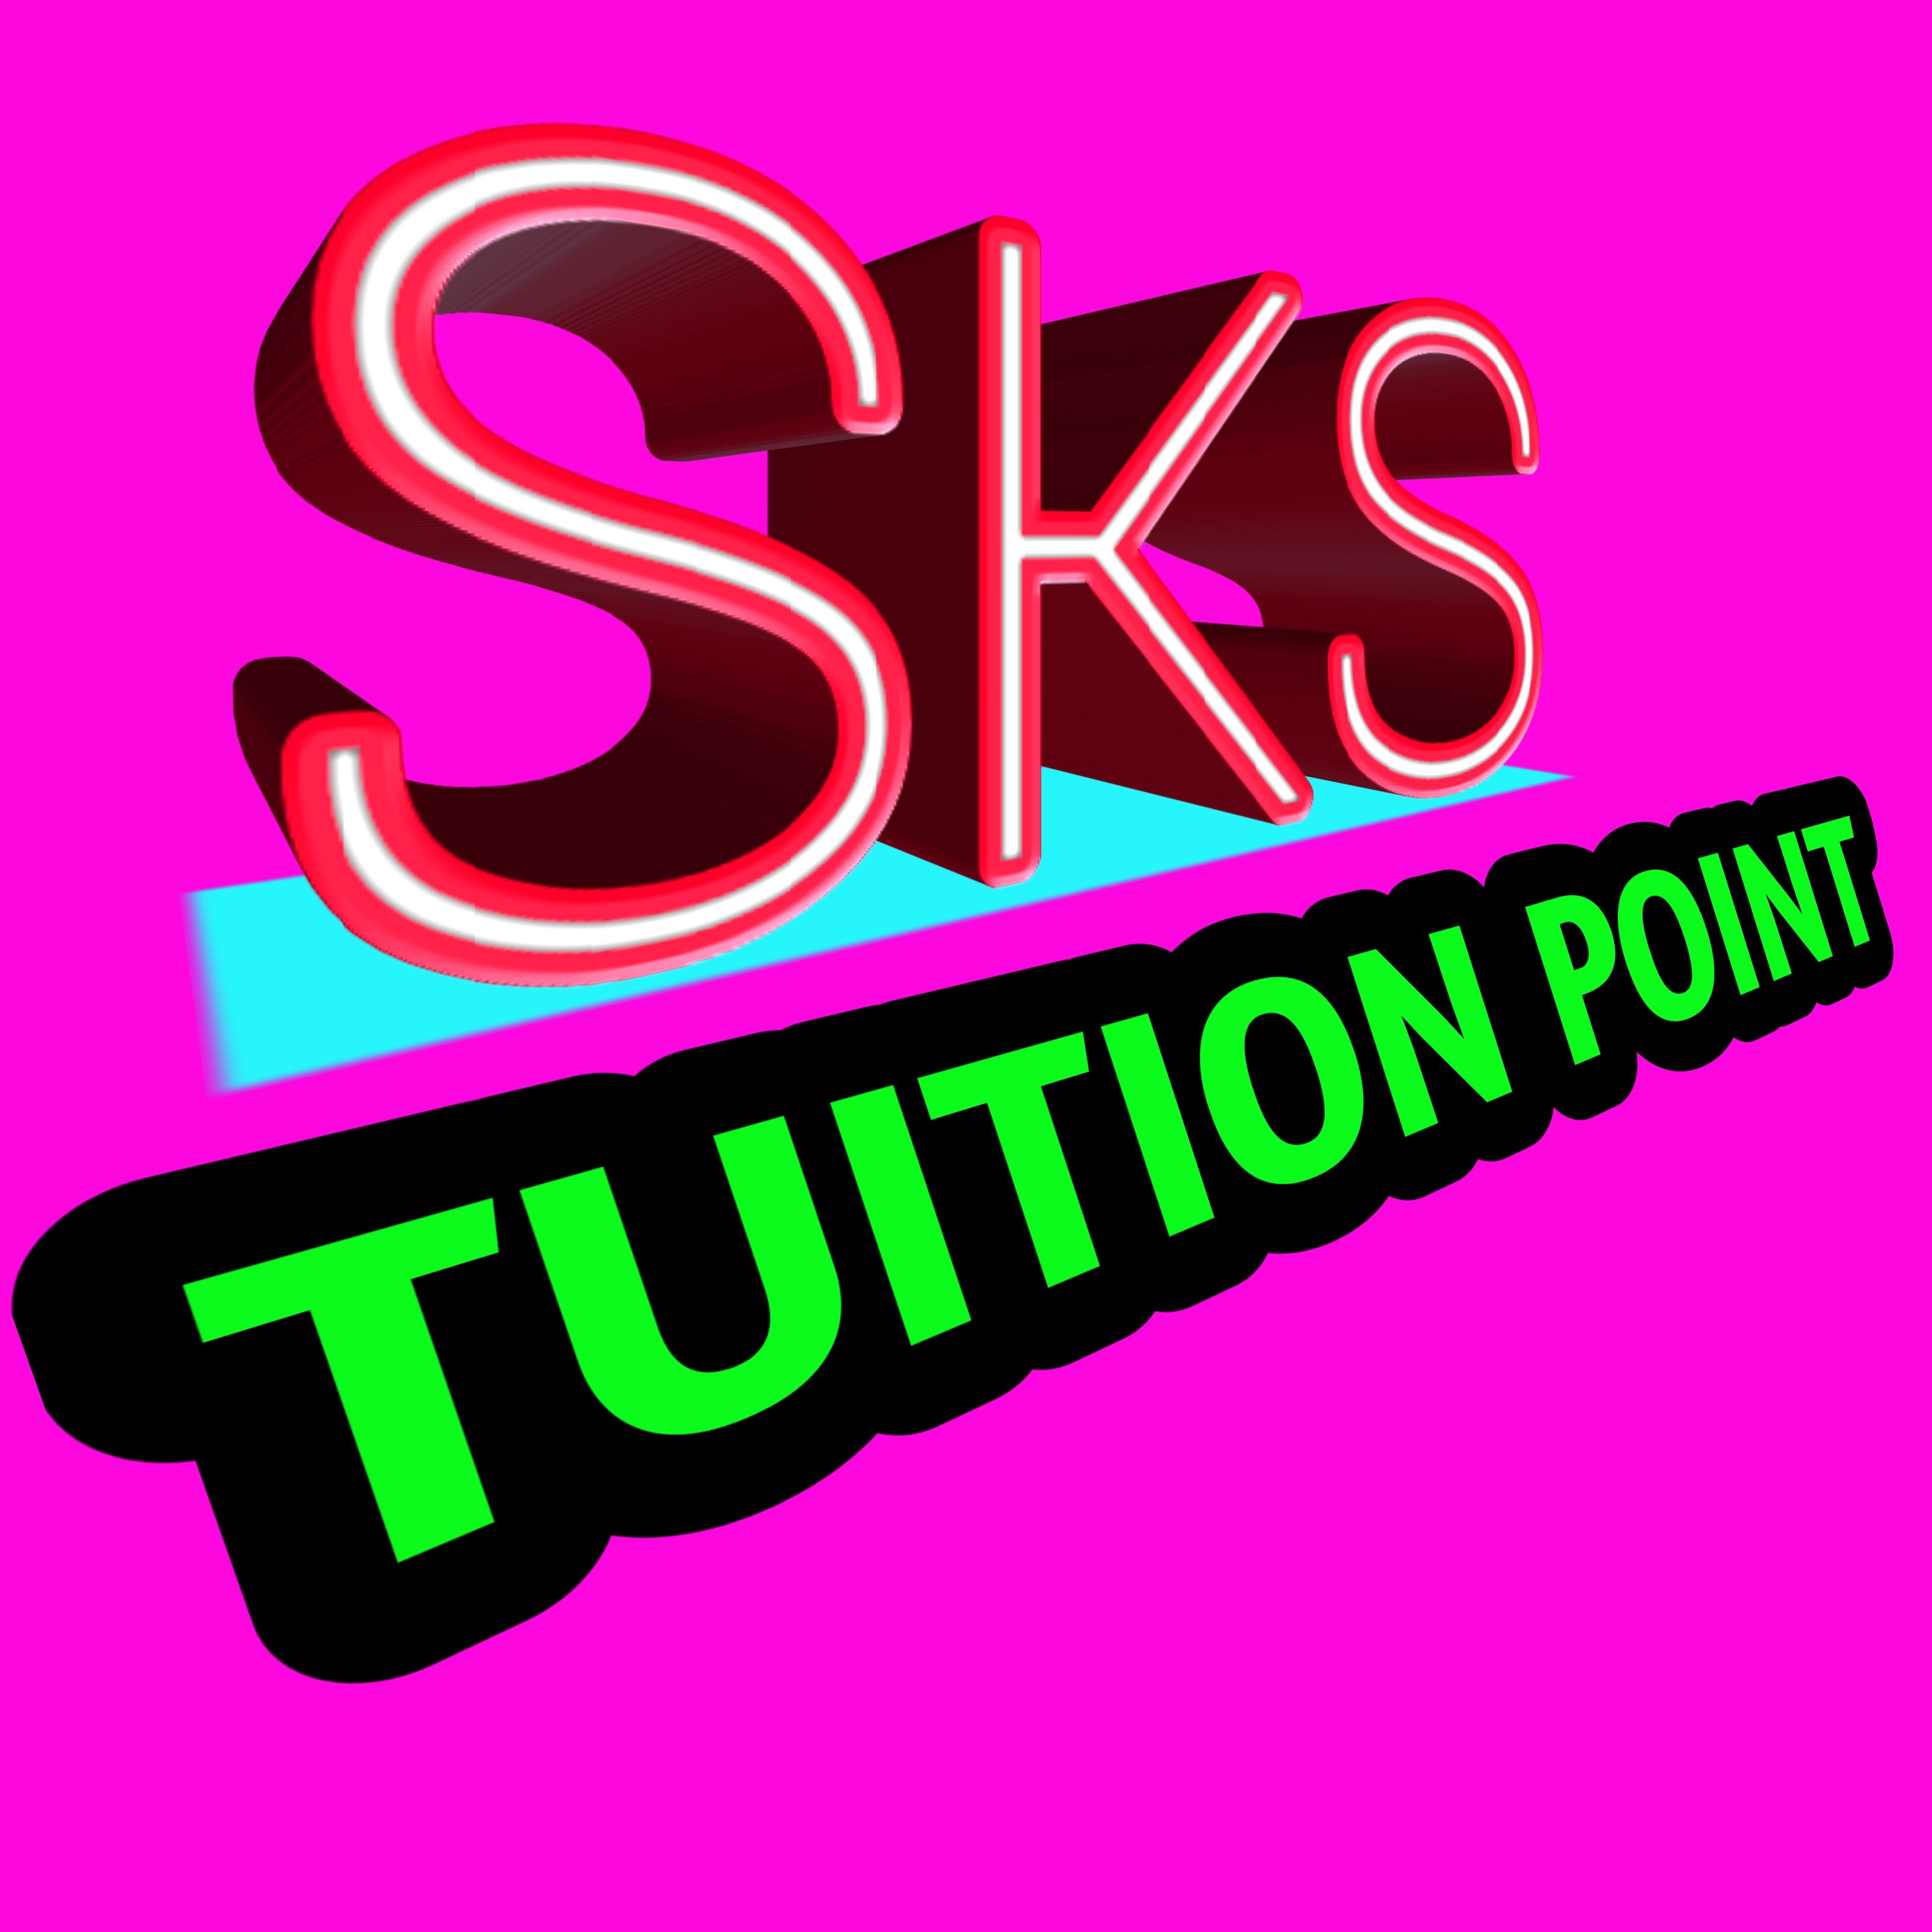 SKS Tuition Point